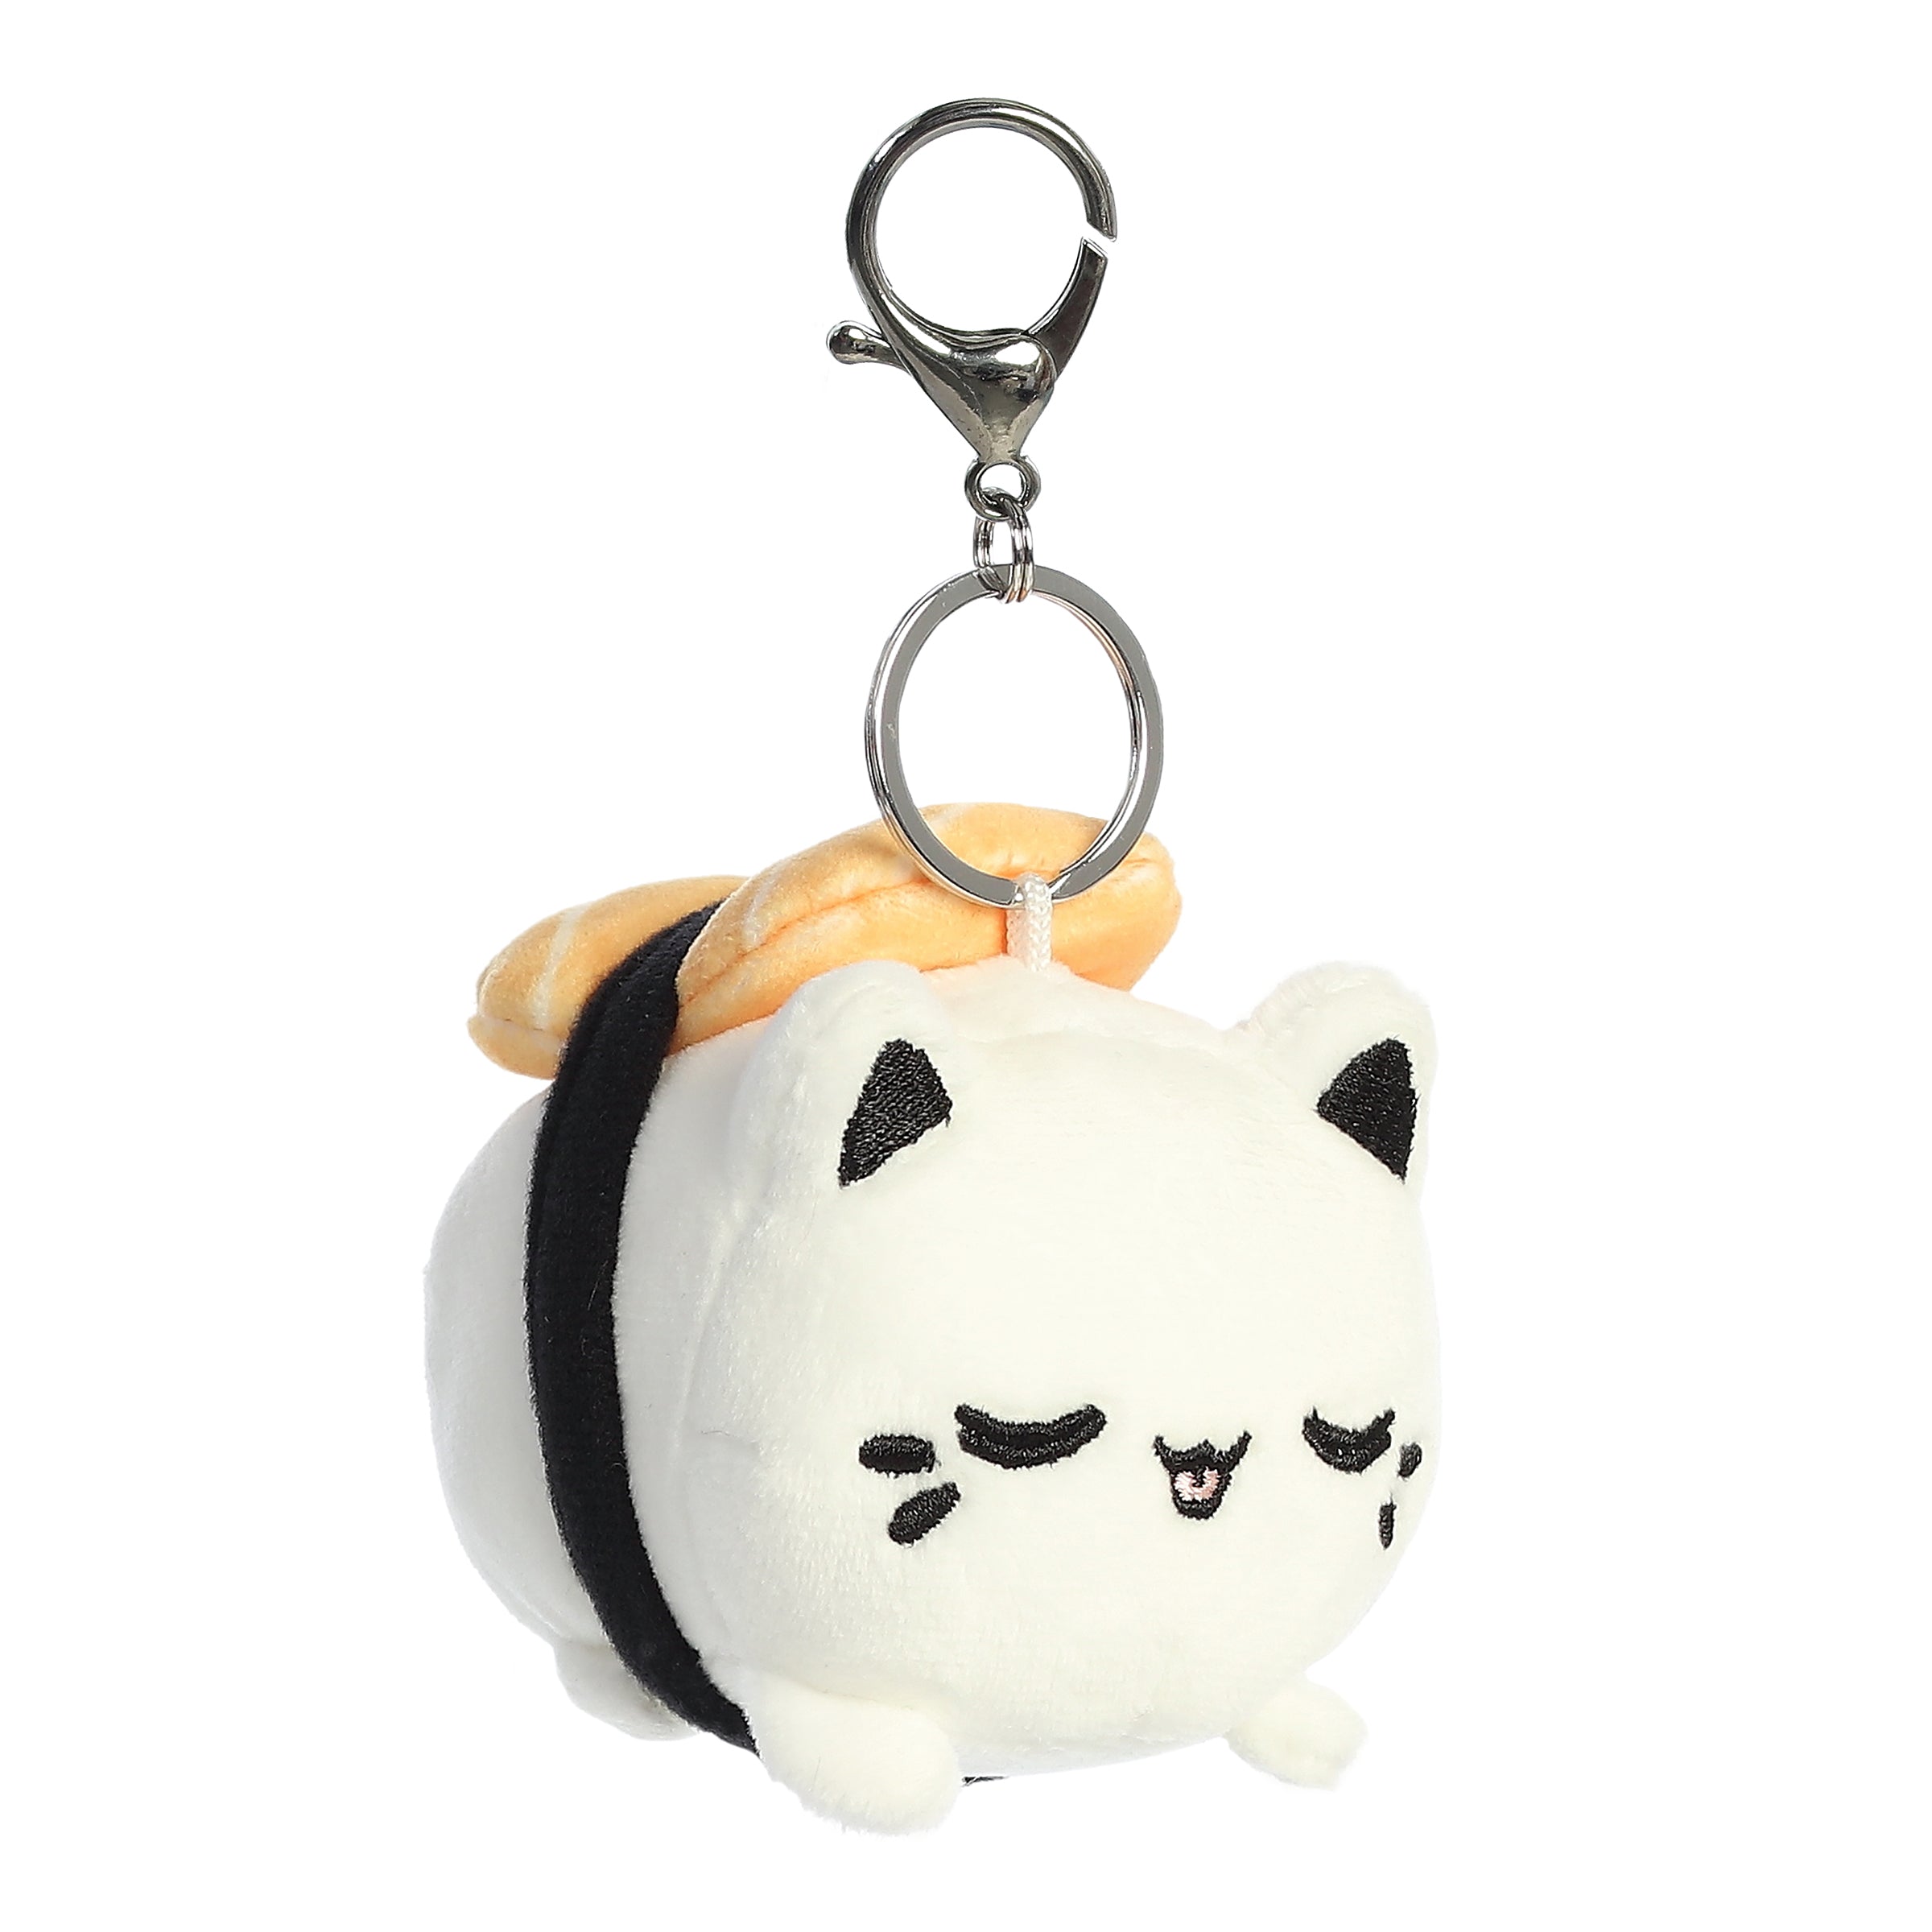 A white Meowchi cat clip-on made to resemble a sushi roll with an orange slice of salmon and a peaceful animated expression.